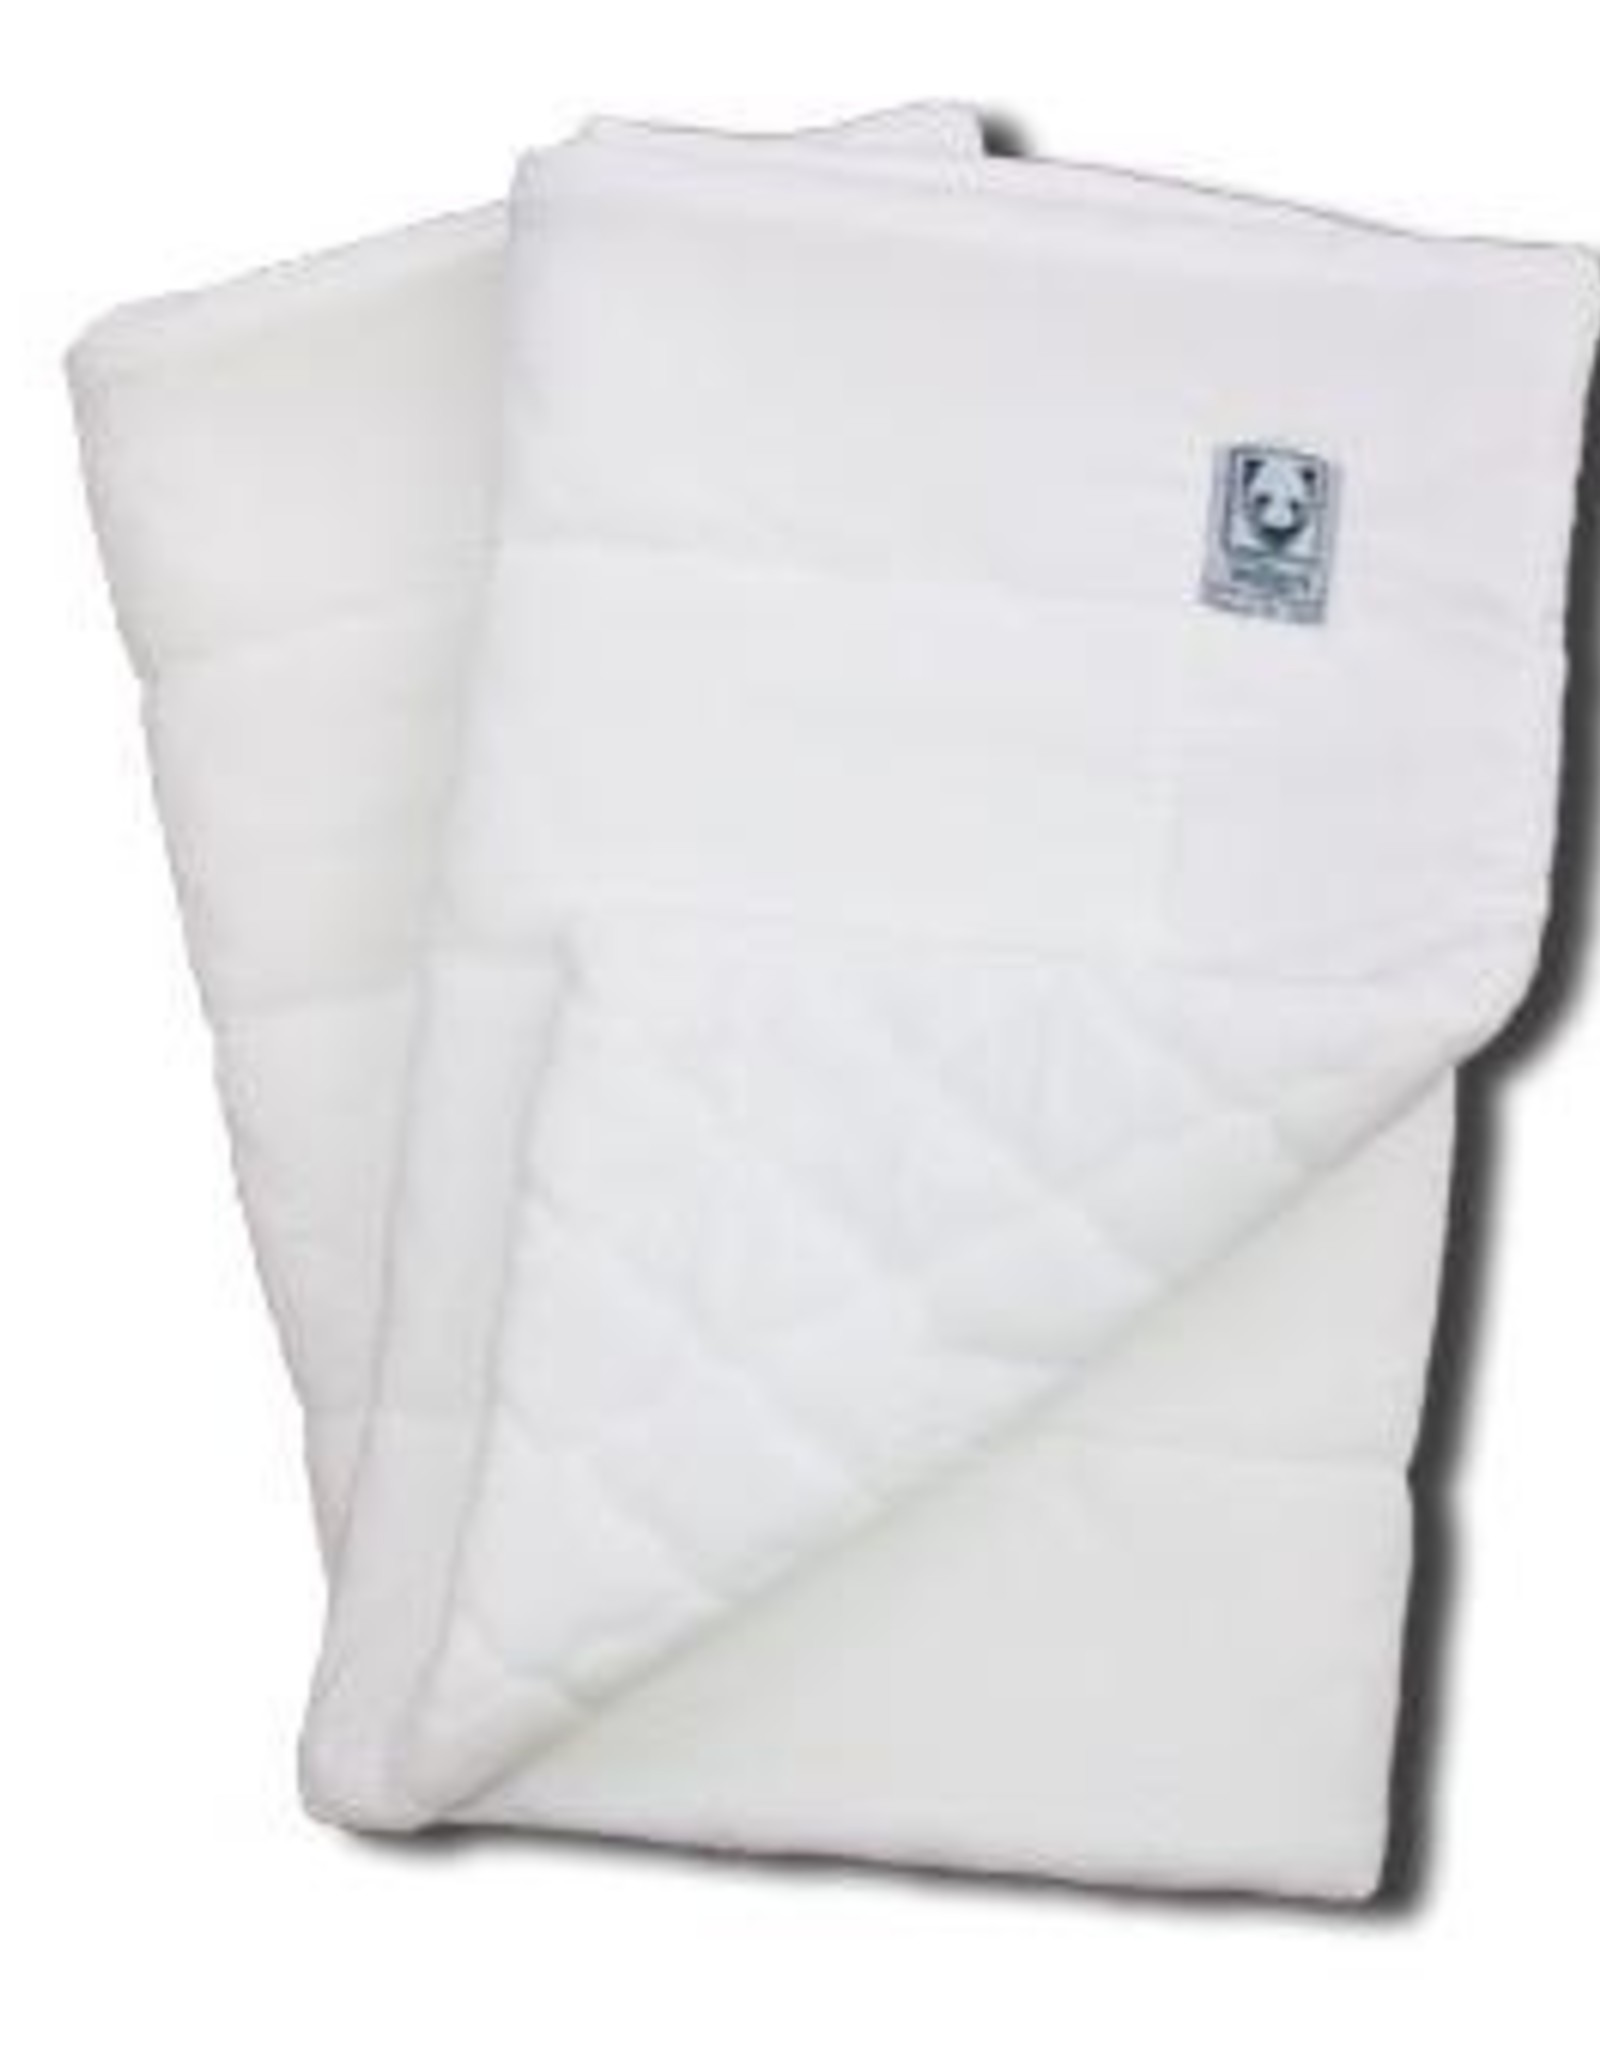 Wilkers Wilkers Combo Quilted Leg Wraps - 8" to 14"